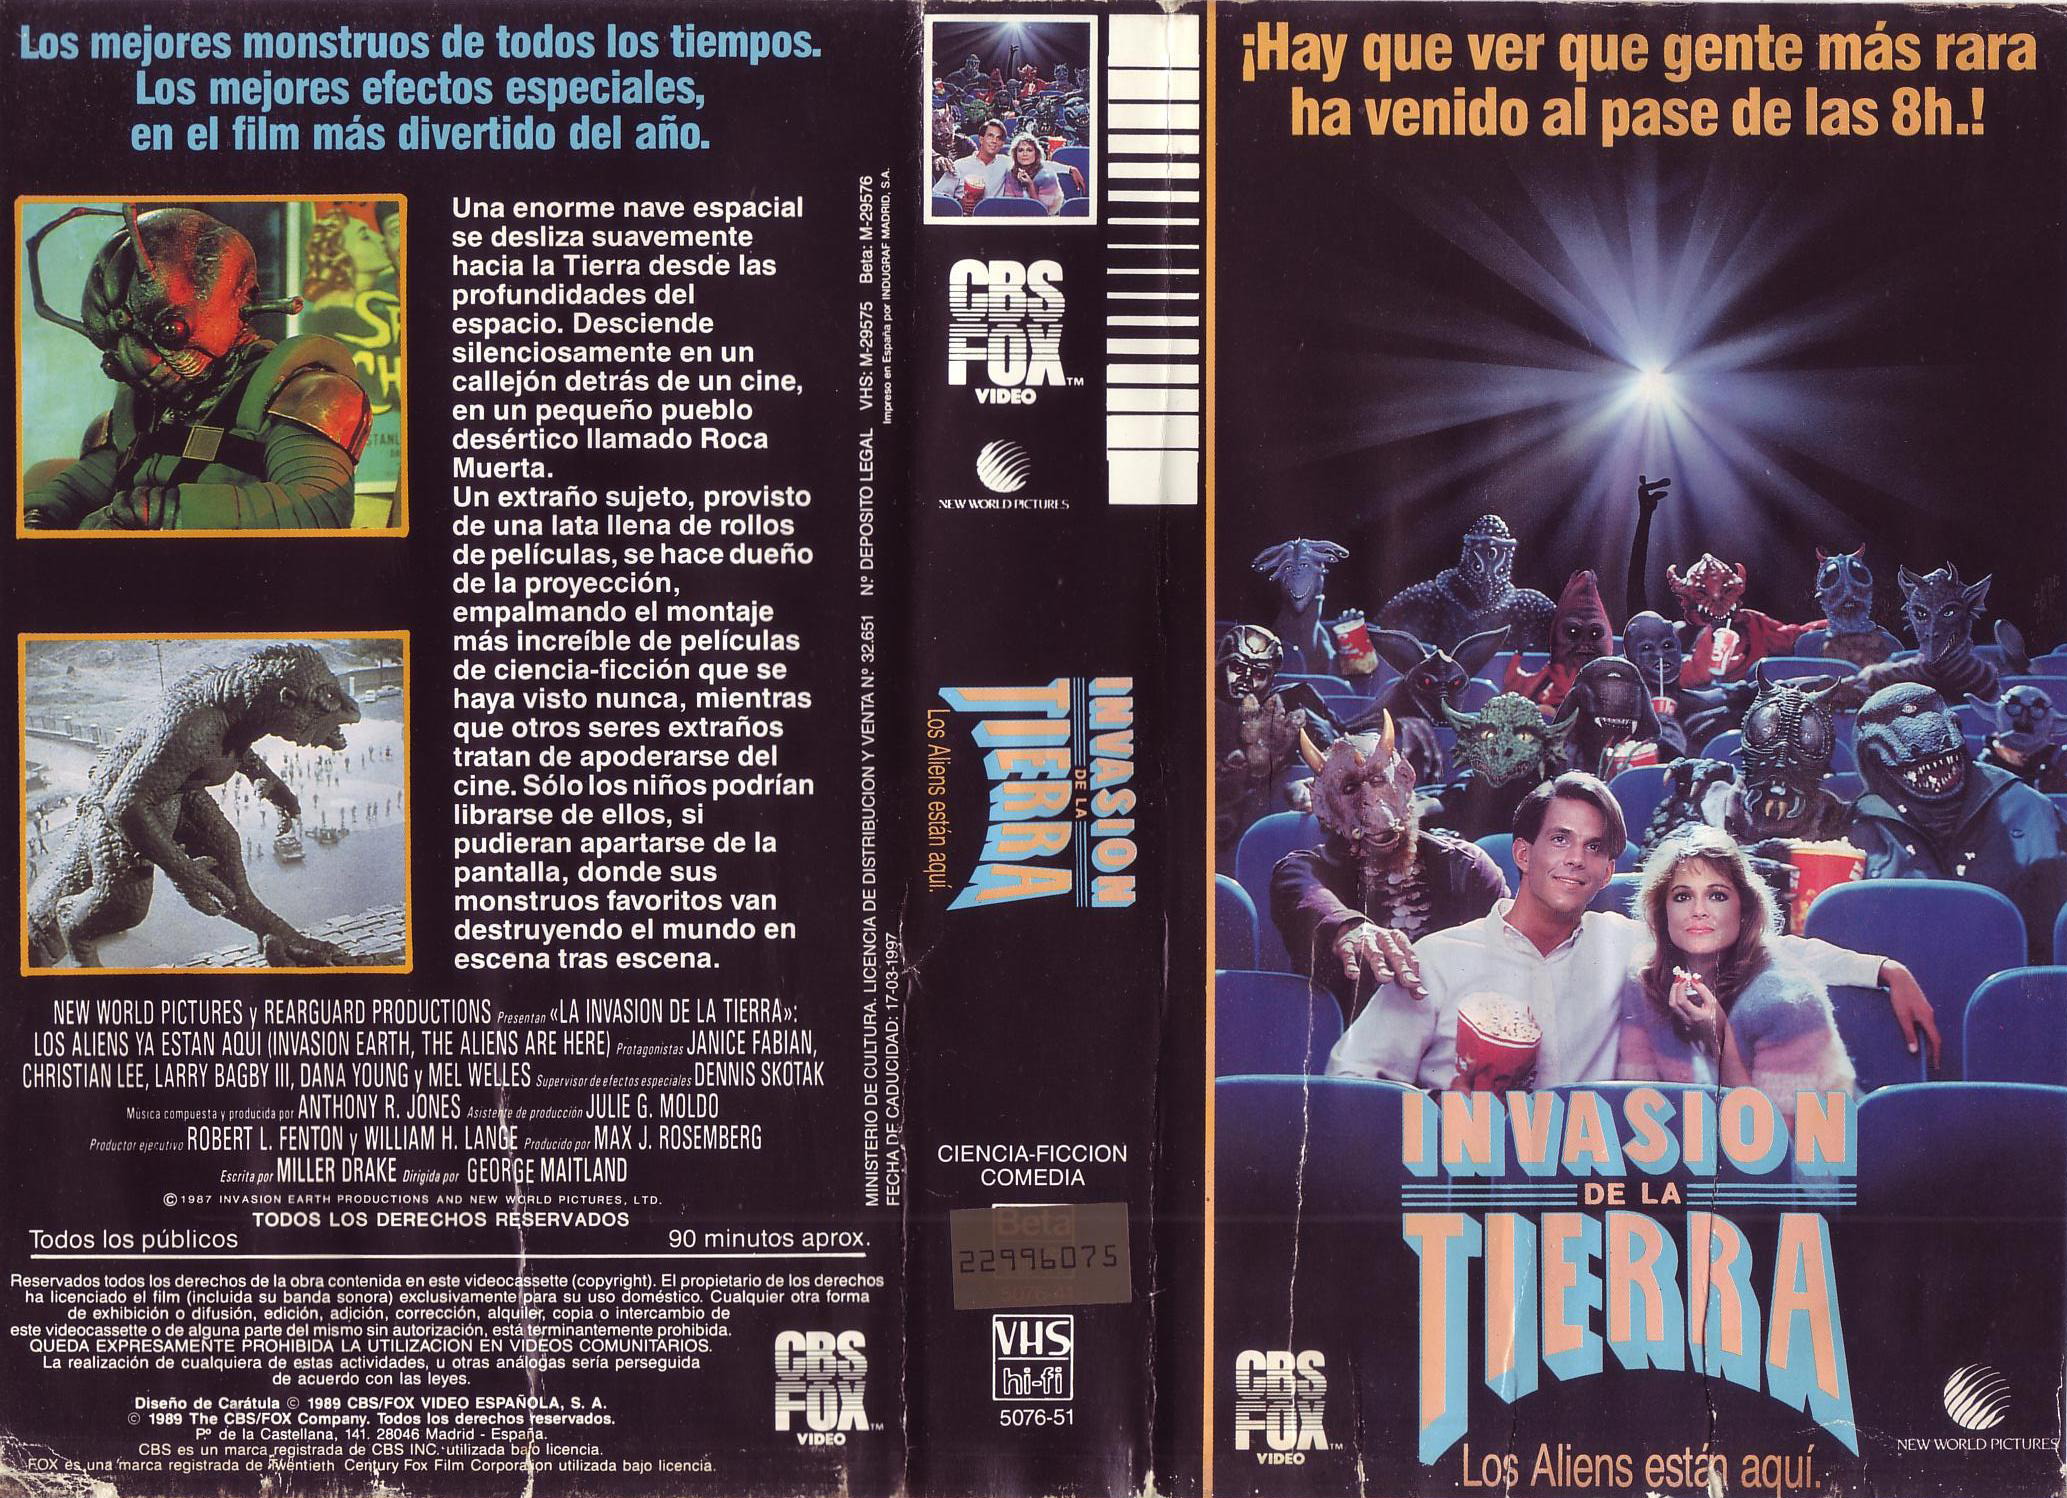 Invasion Earth: The Aliens Are Here (1988) Screenshot 2